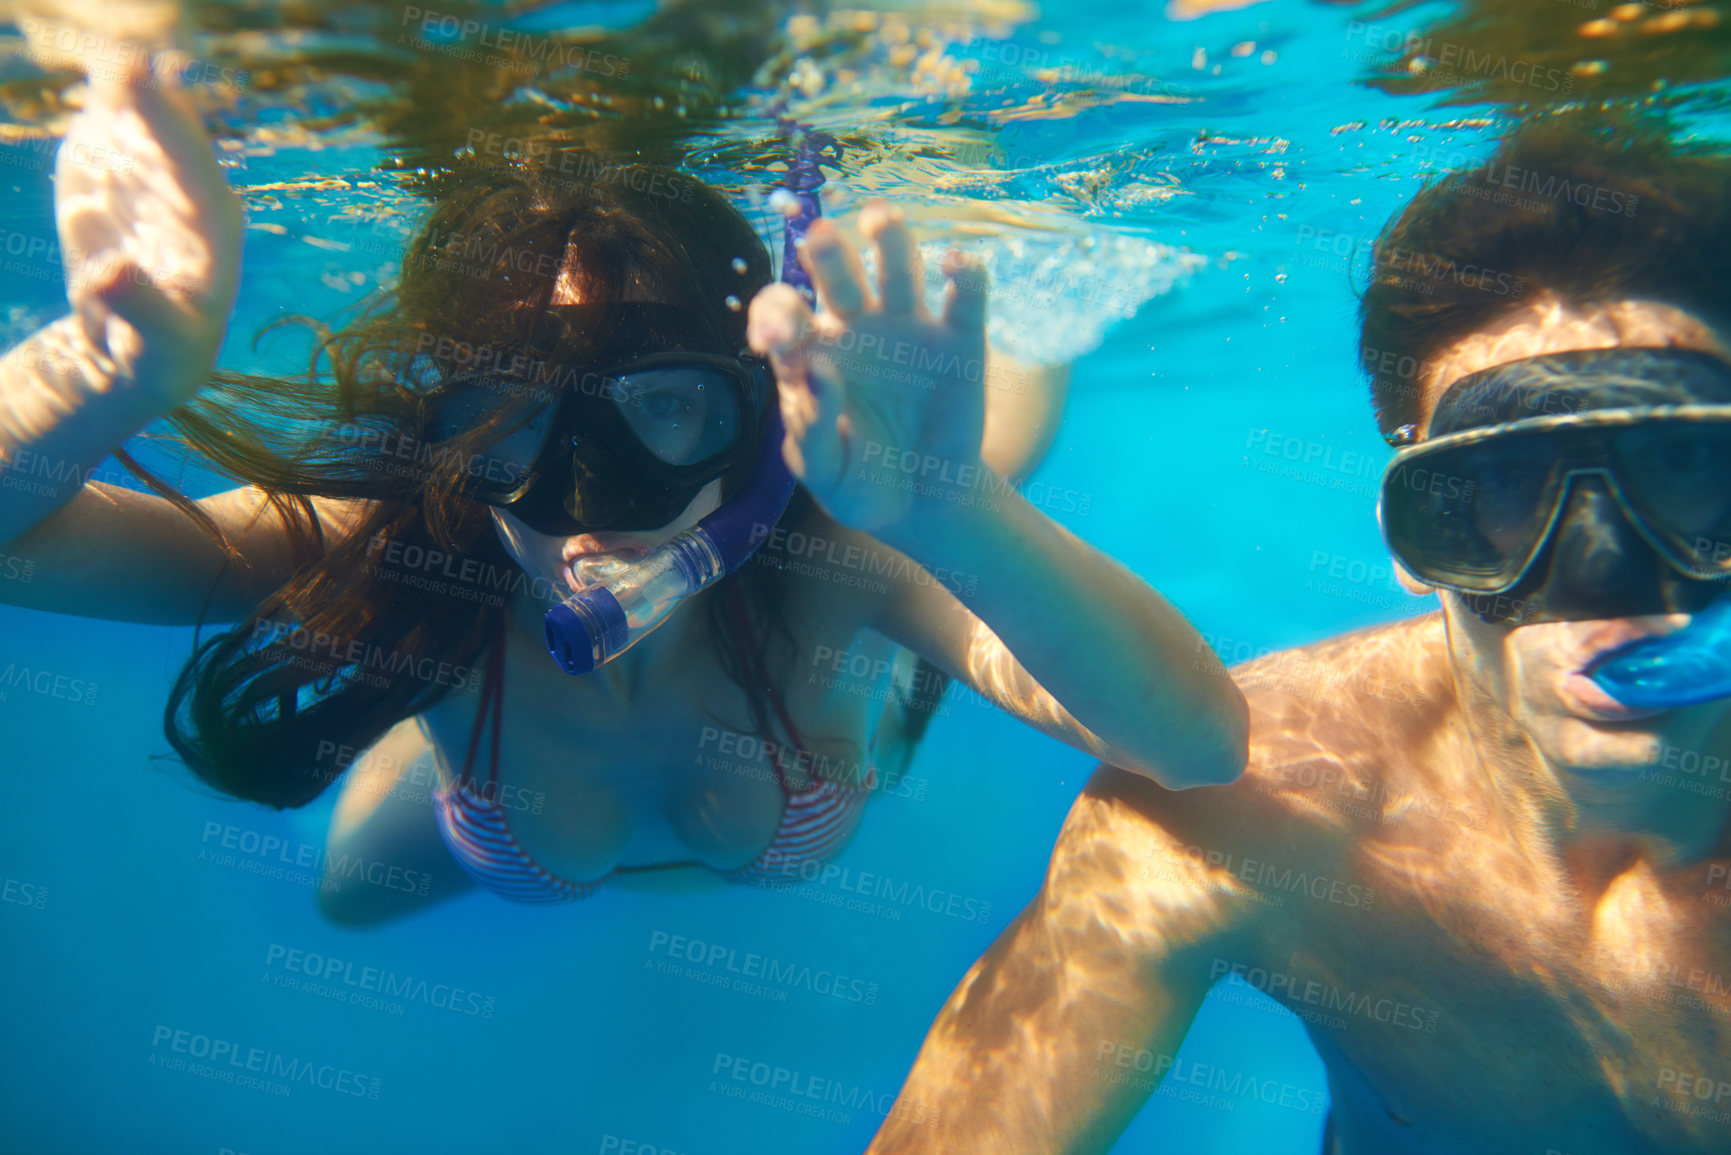 Buy stock photo Scuba diving, underwater or couple swimming to explore for marine adventure, hobby or vacation activity. Mask, divers or people at a beach or ocean for travel, tropical environment or outdoor holiday